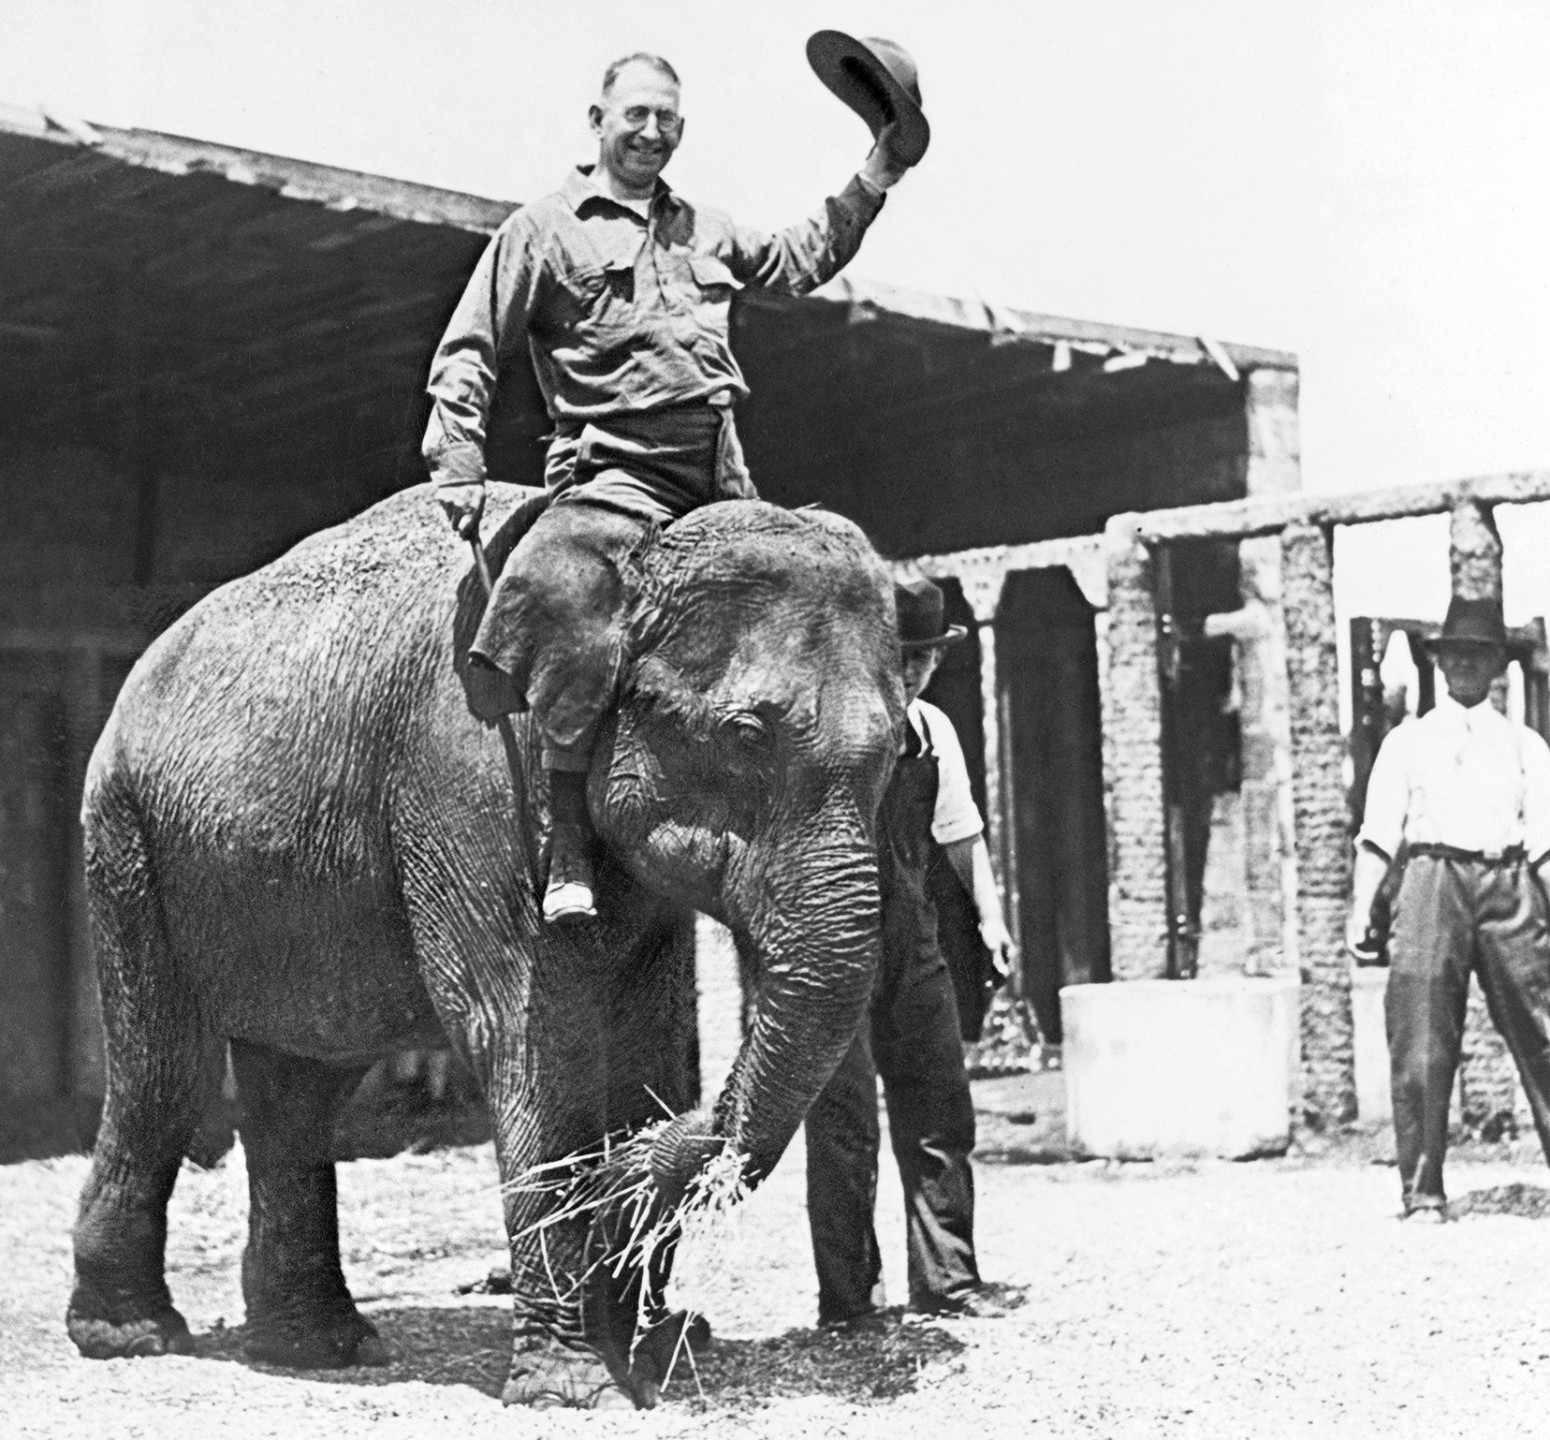 Dr. Harry reenacts his elephant ride for newspaper reporters eager to print the story.